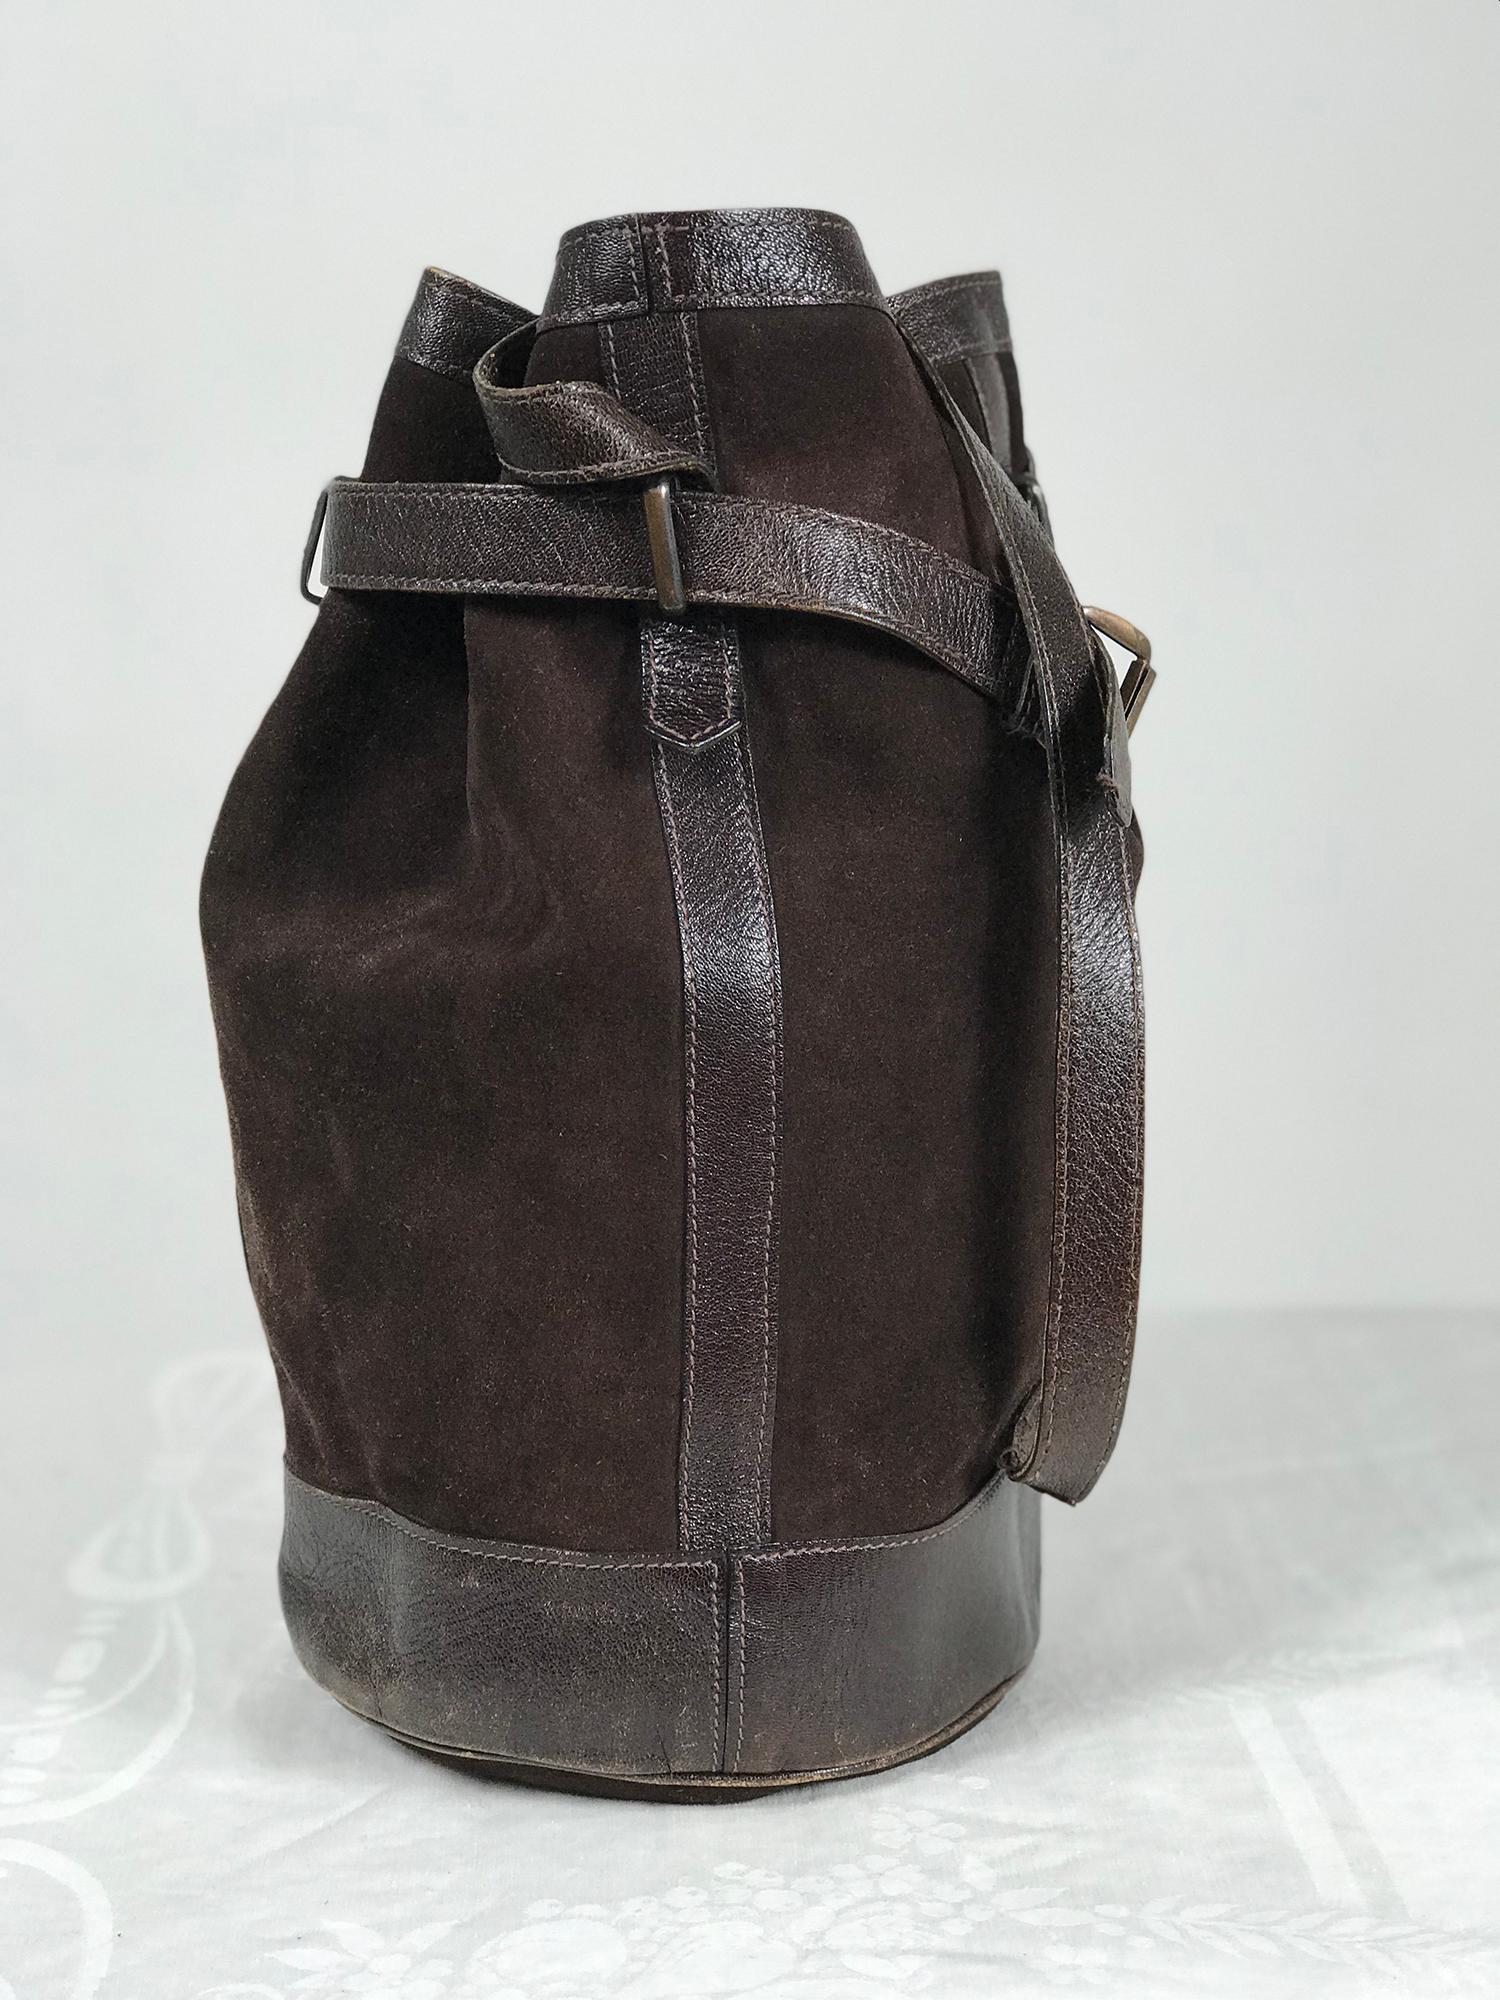 Vintage Yves Saint Laurent brown suede and leather bucket shoulder bag from the 1970s. A beautiful and unique bag is remarkable condition for it's age. Dark chocolate brown soft suede with leather trims and straps. The bag is tall and round, the